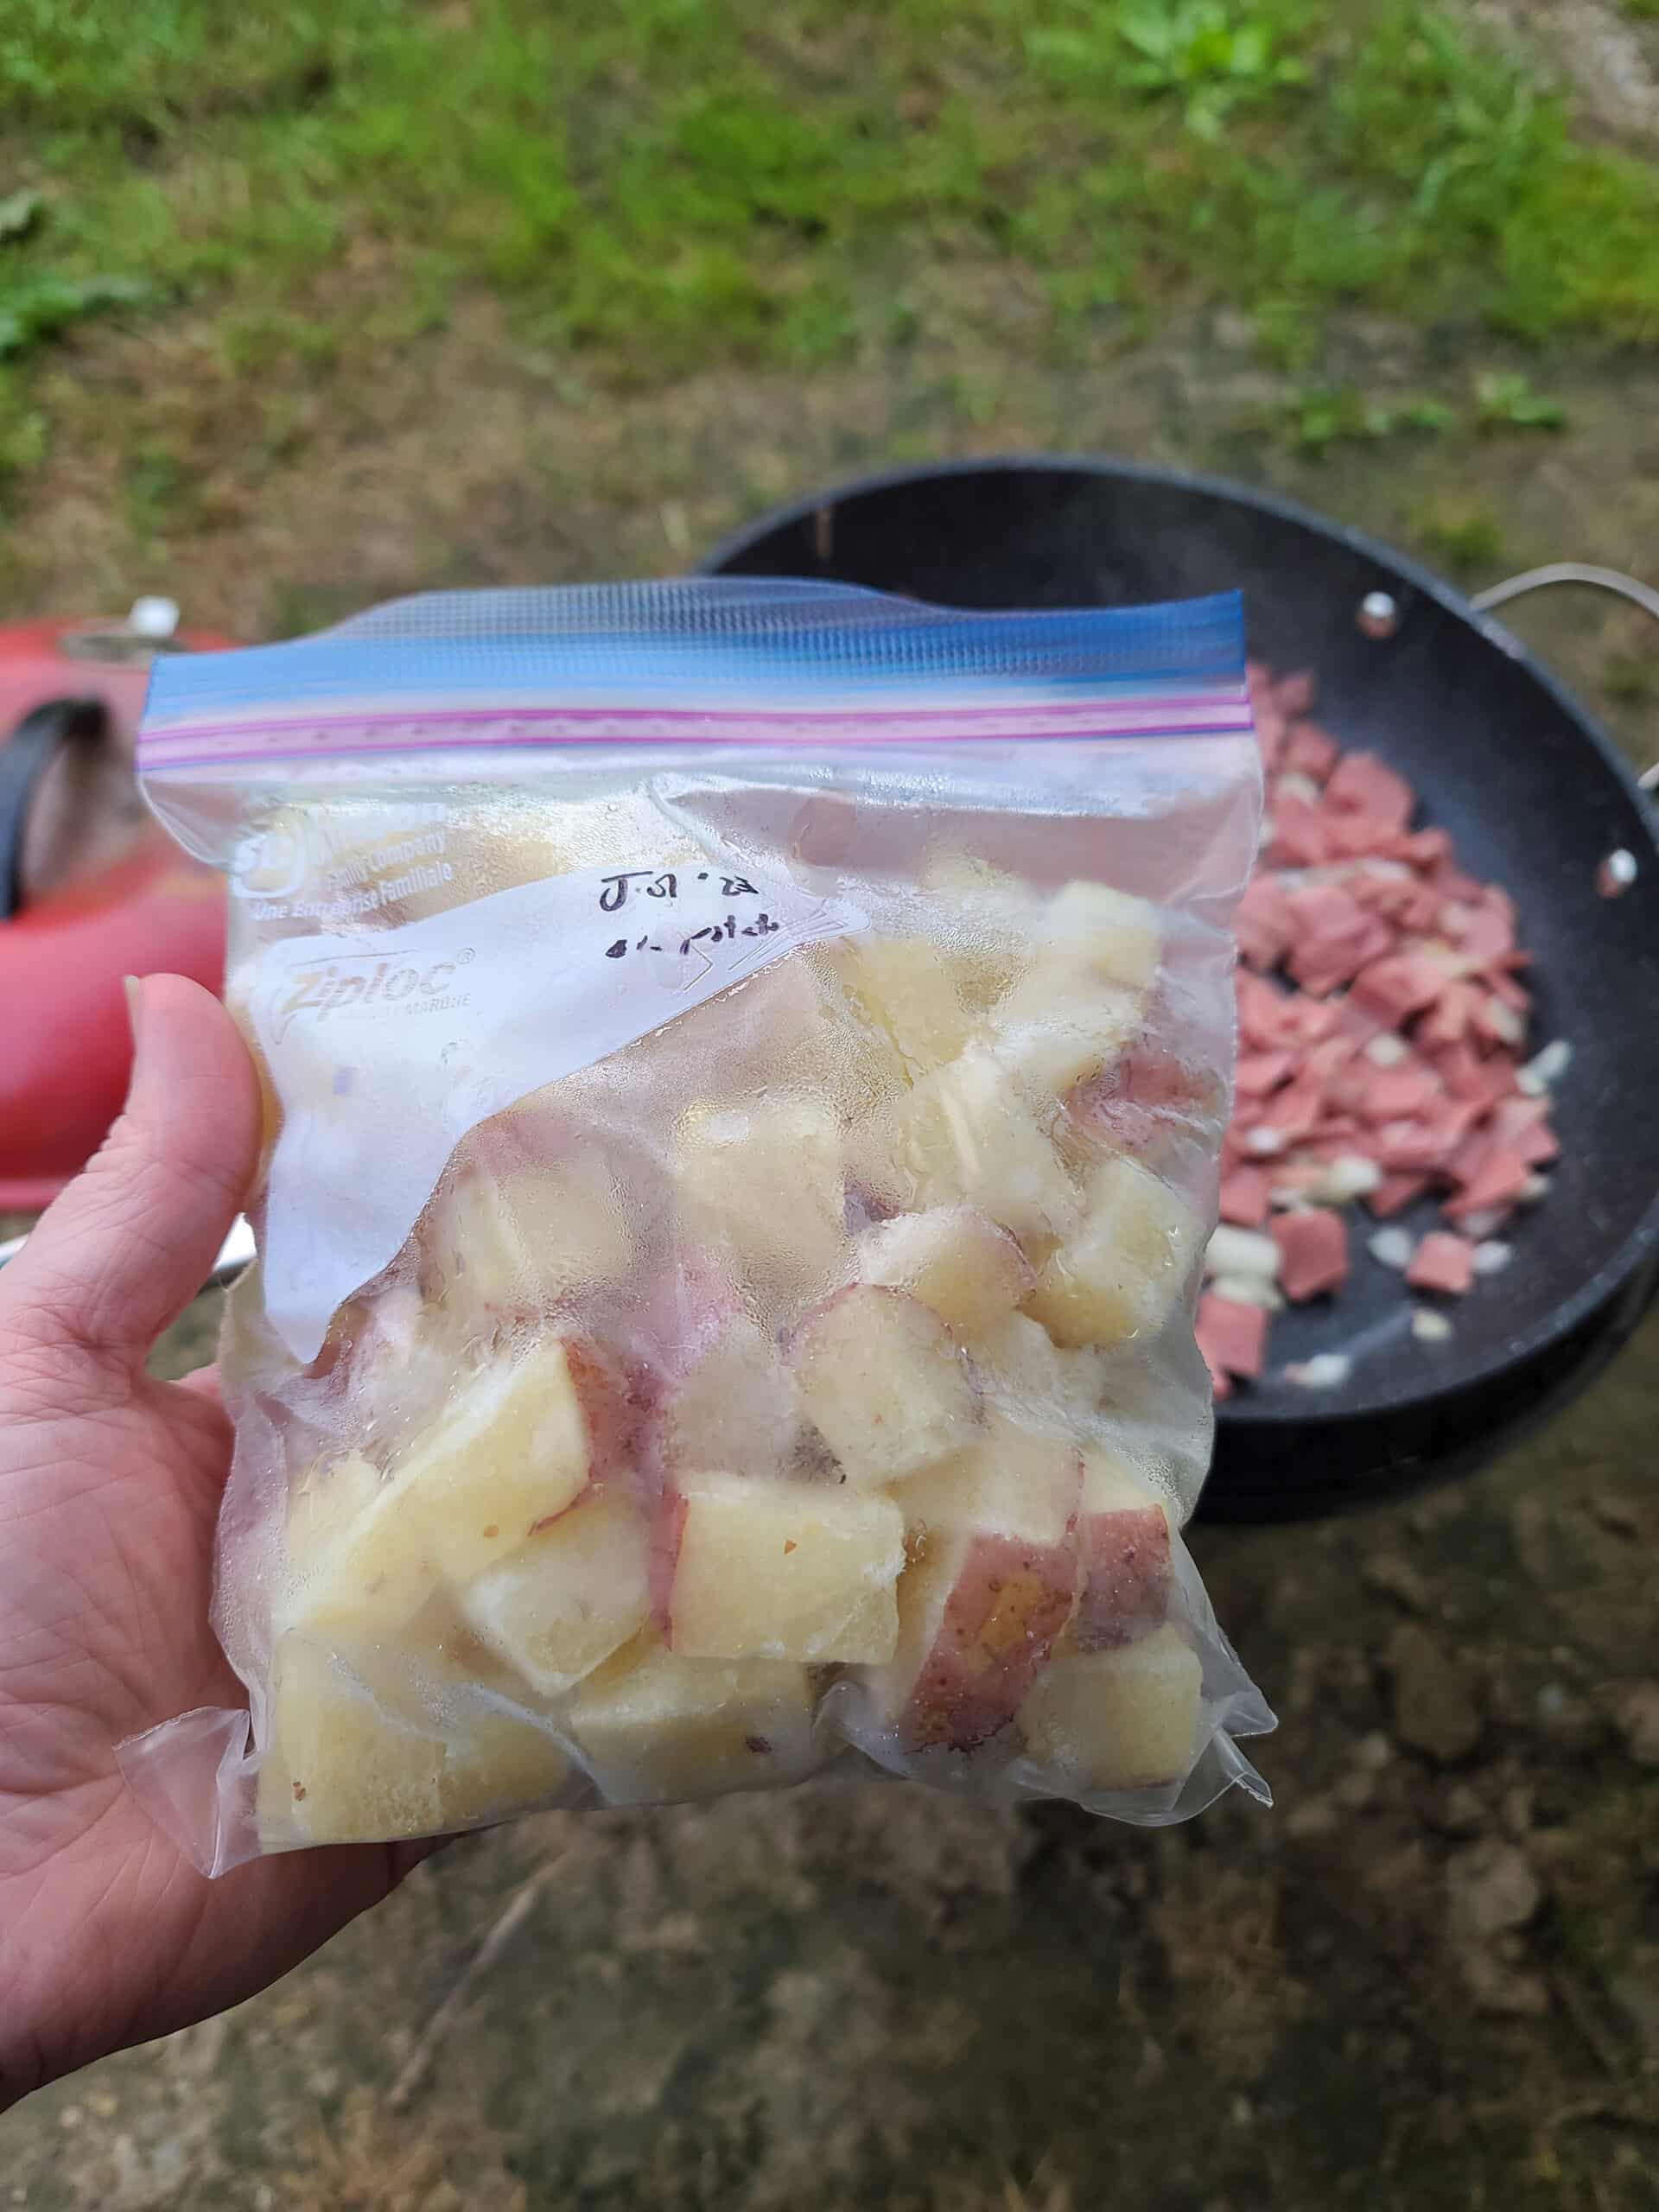 A hand holds a bag of frozen potato cubes in front of a skillet over a charcoal grill.